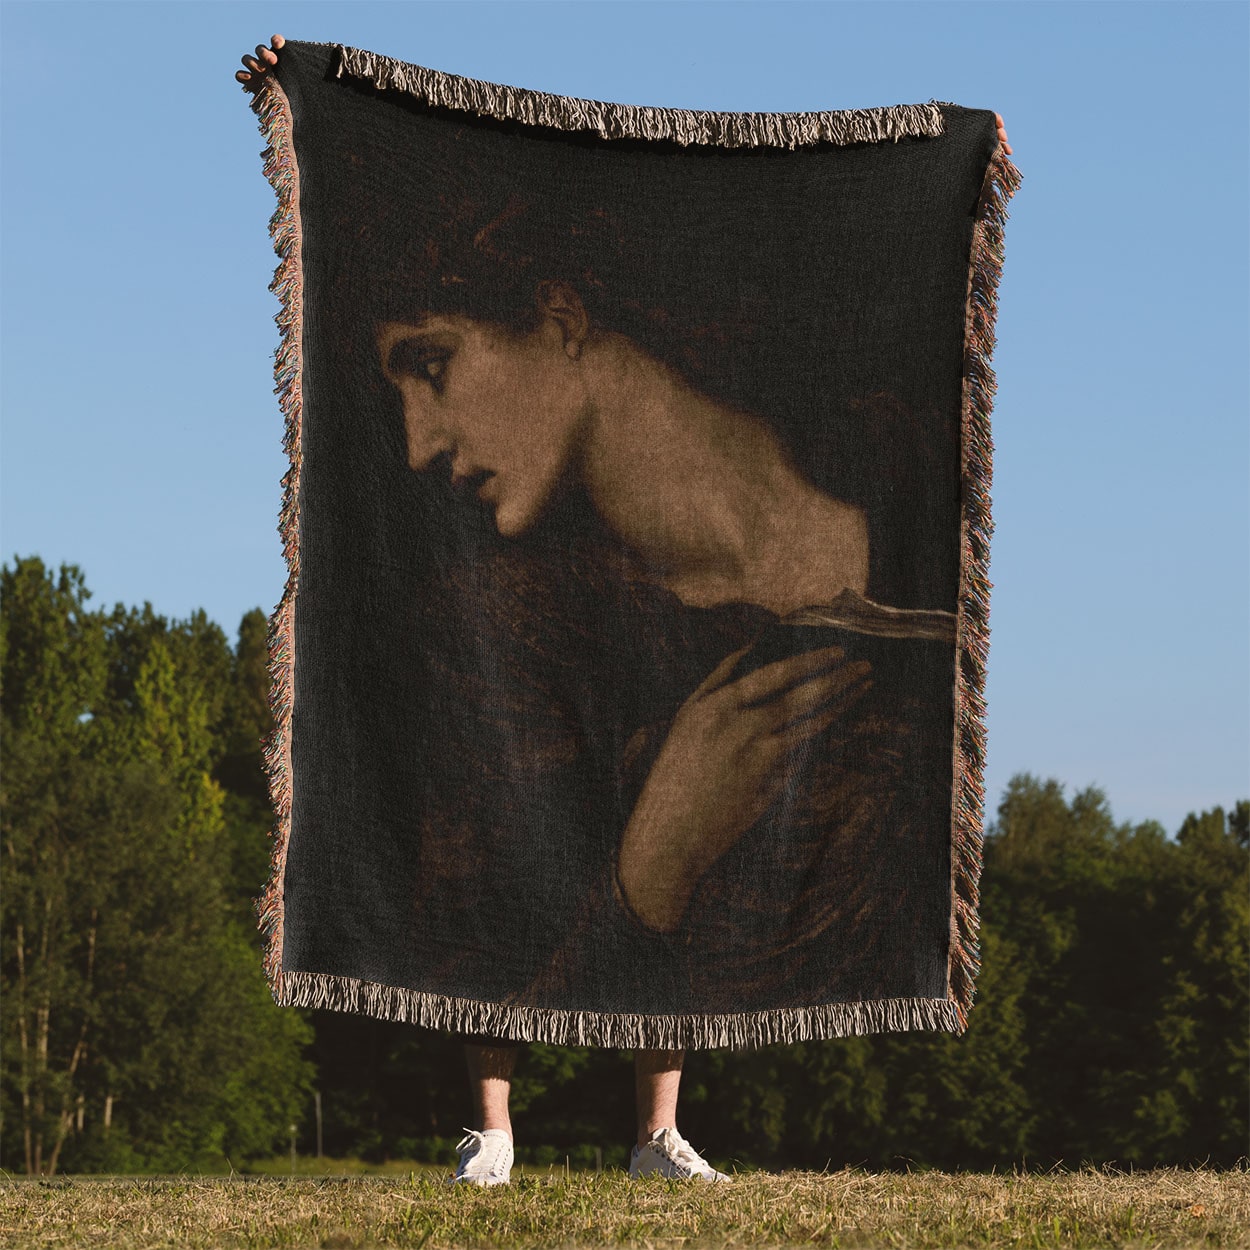 Black and White Moody Woven Blanket Held Up Outside